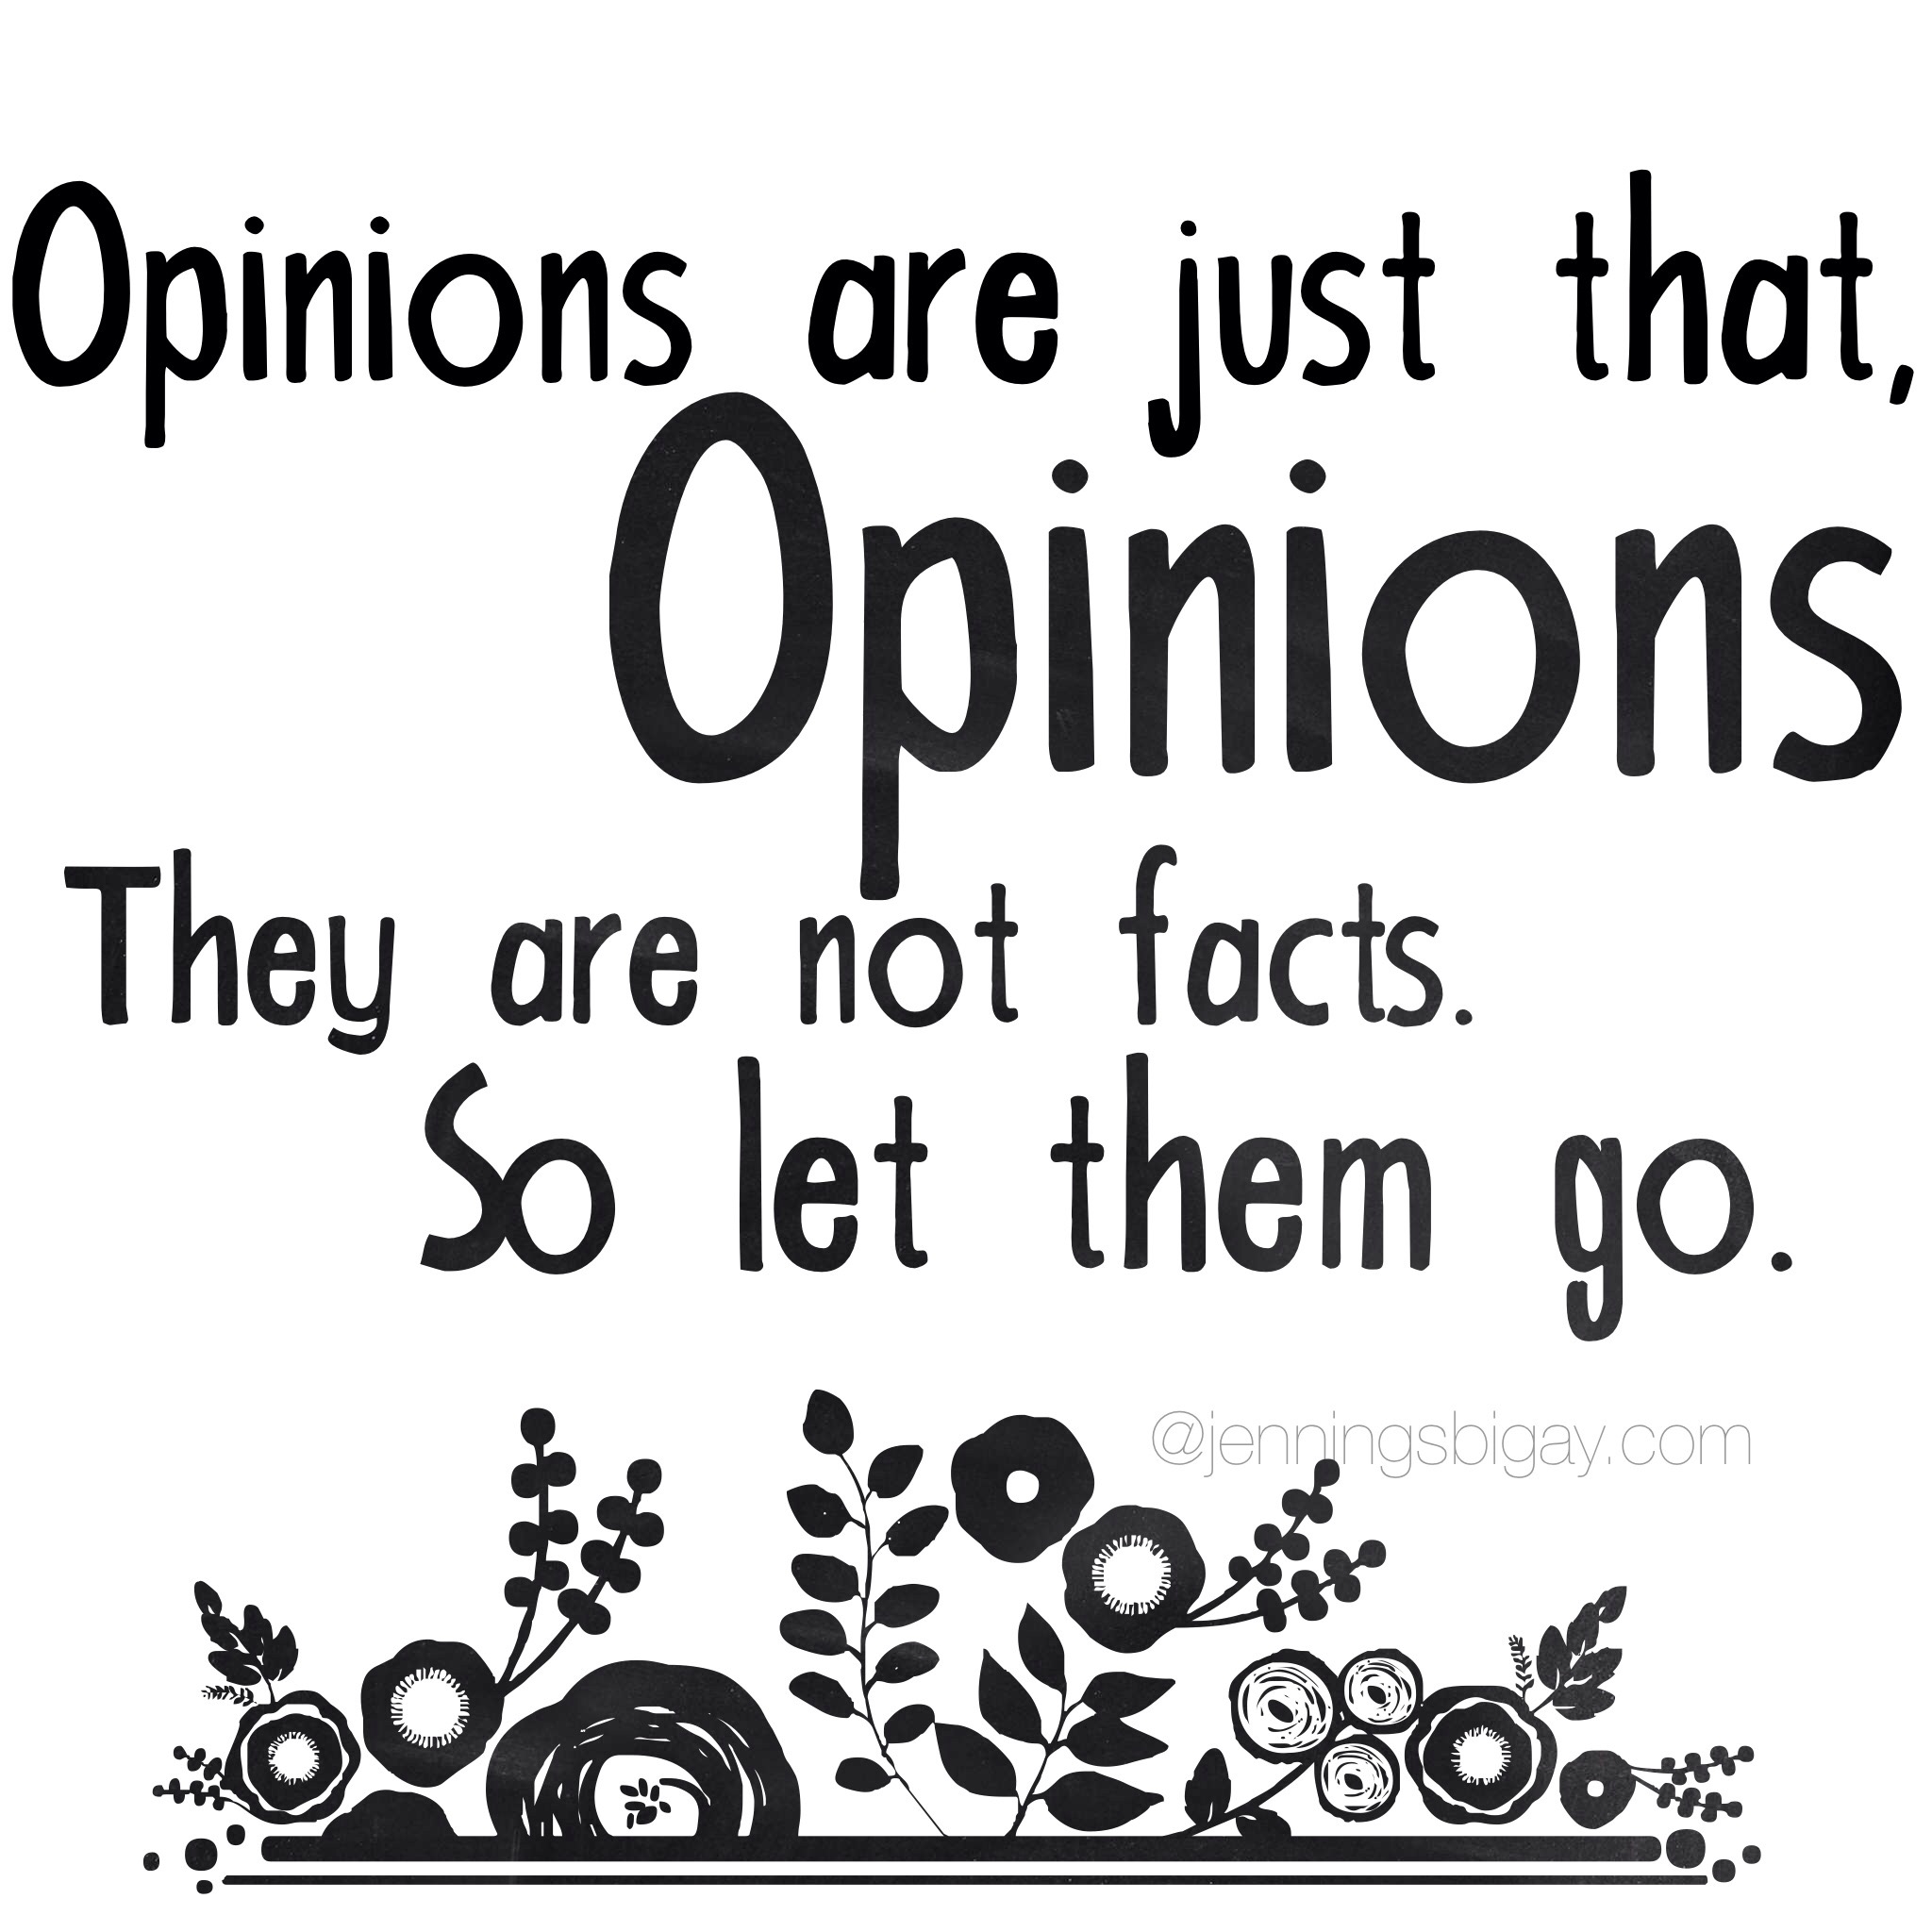 62 Top Opinion Quotes & Sayings